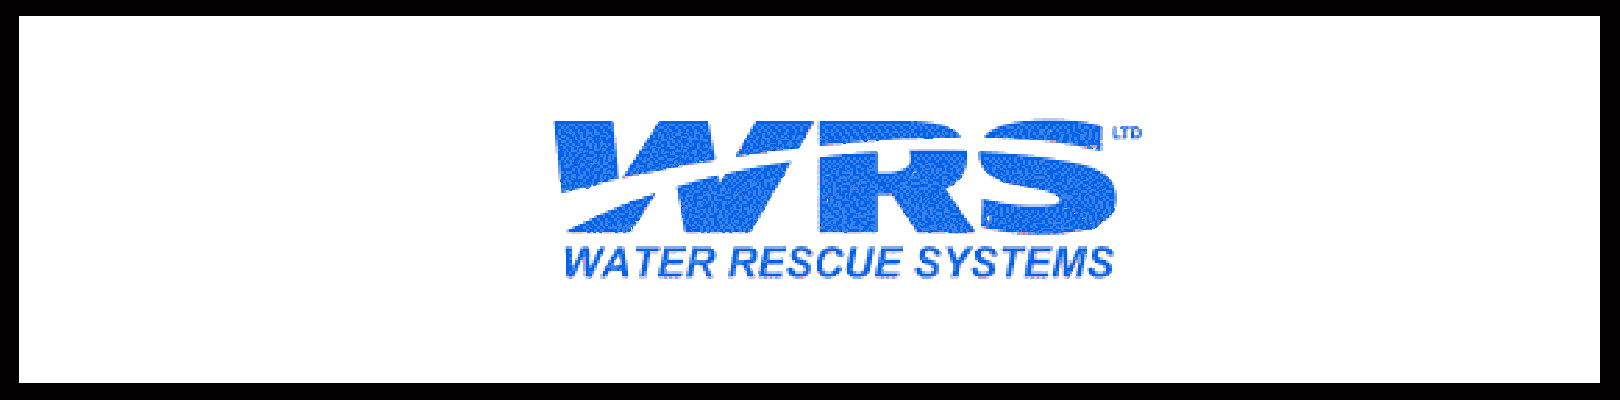 Water Rescue Systems